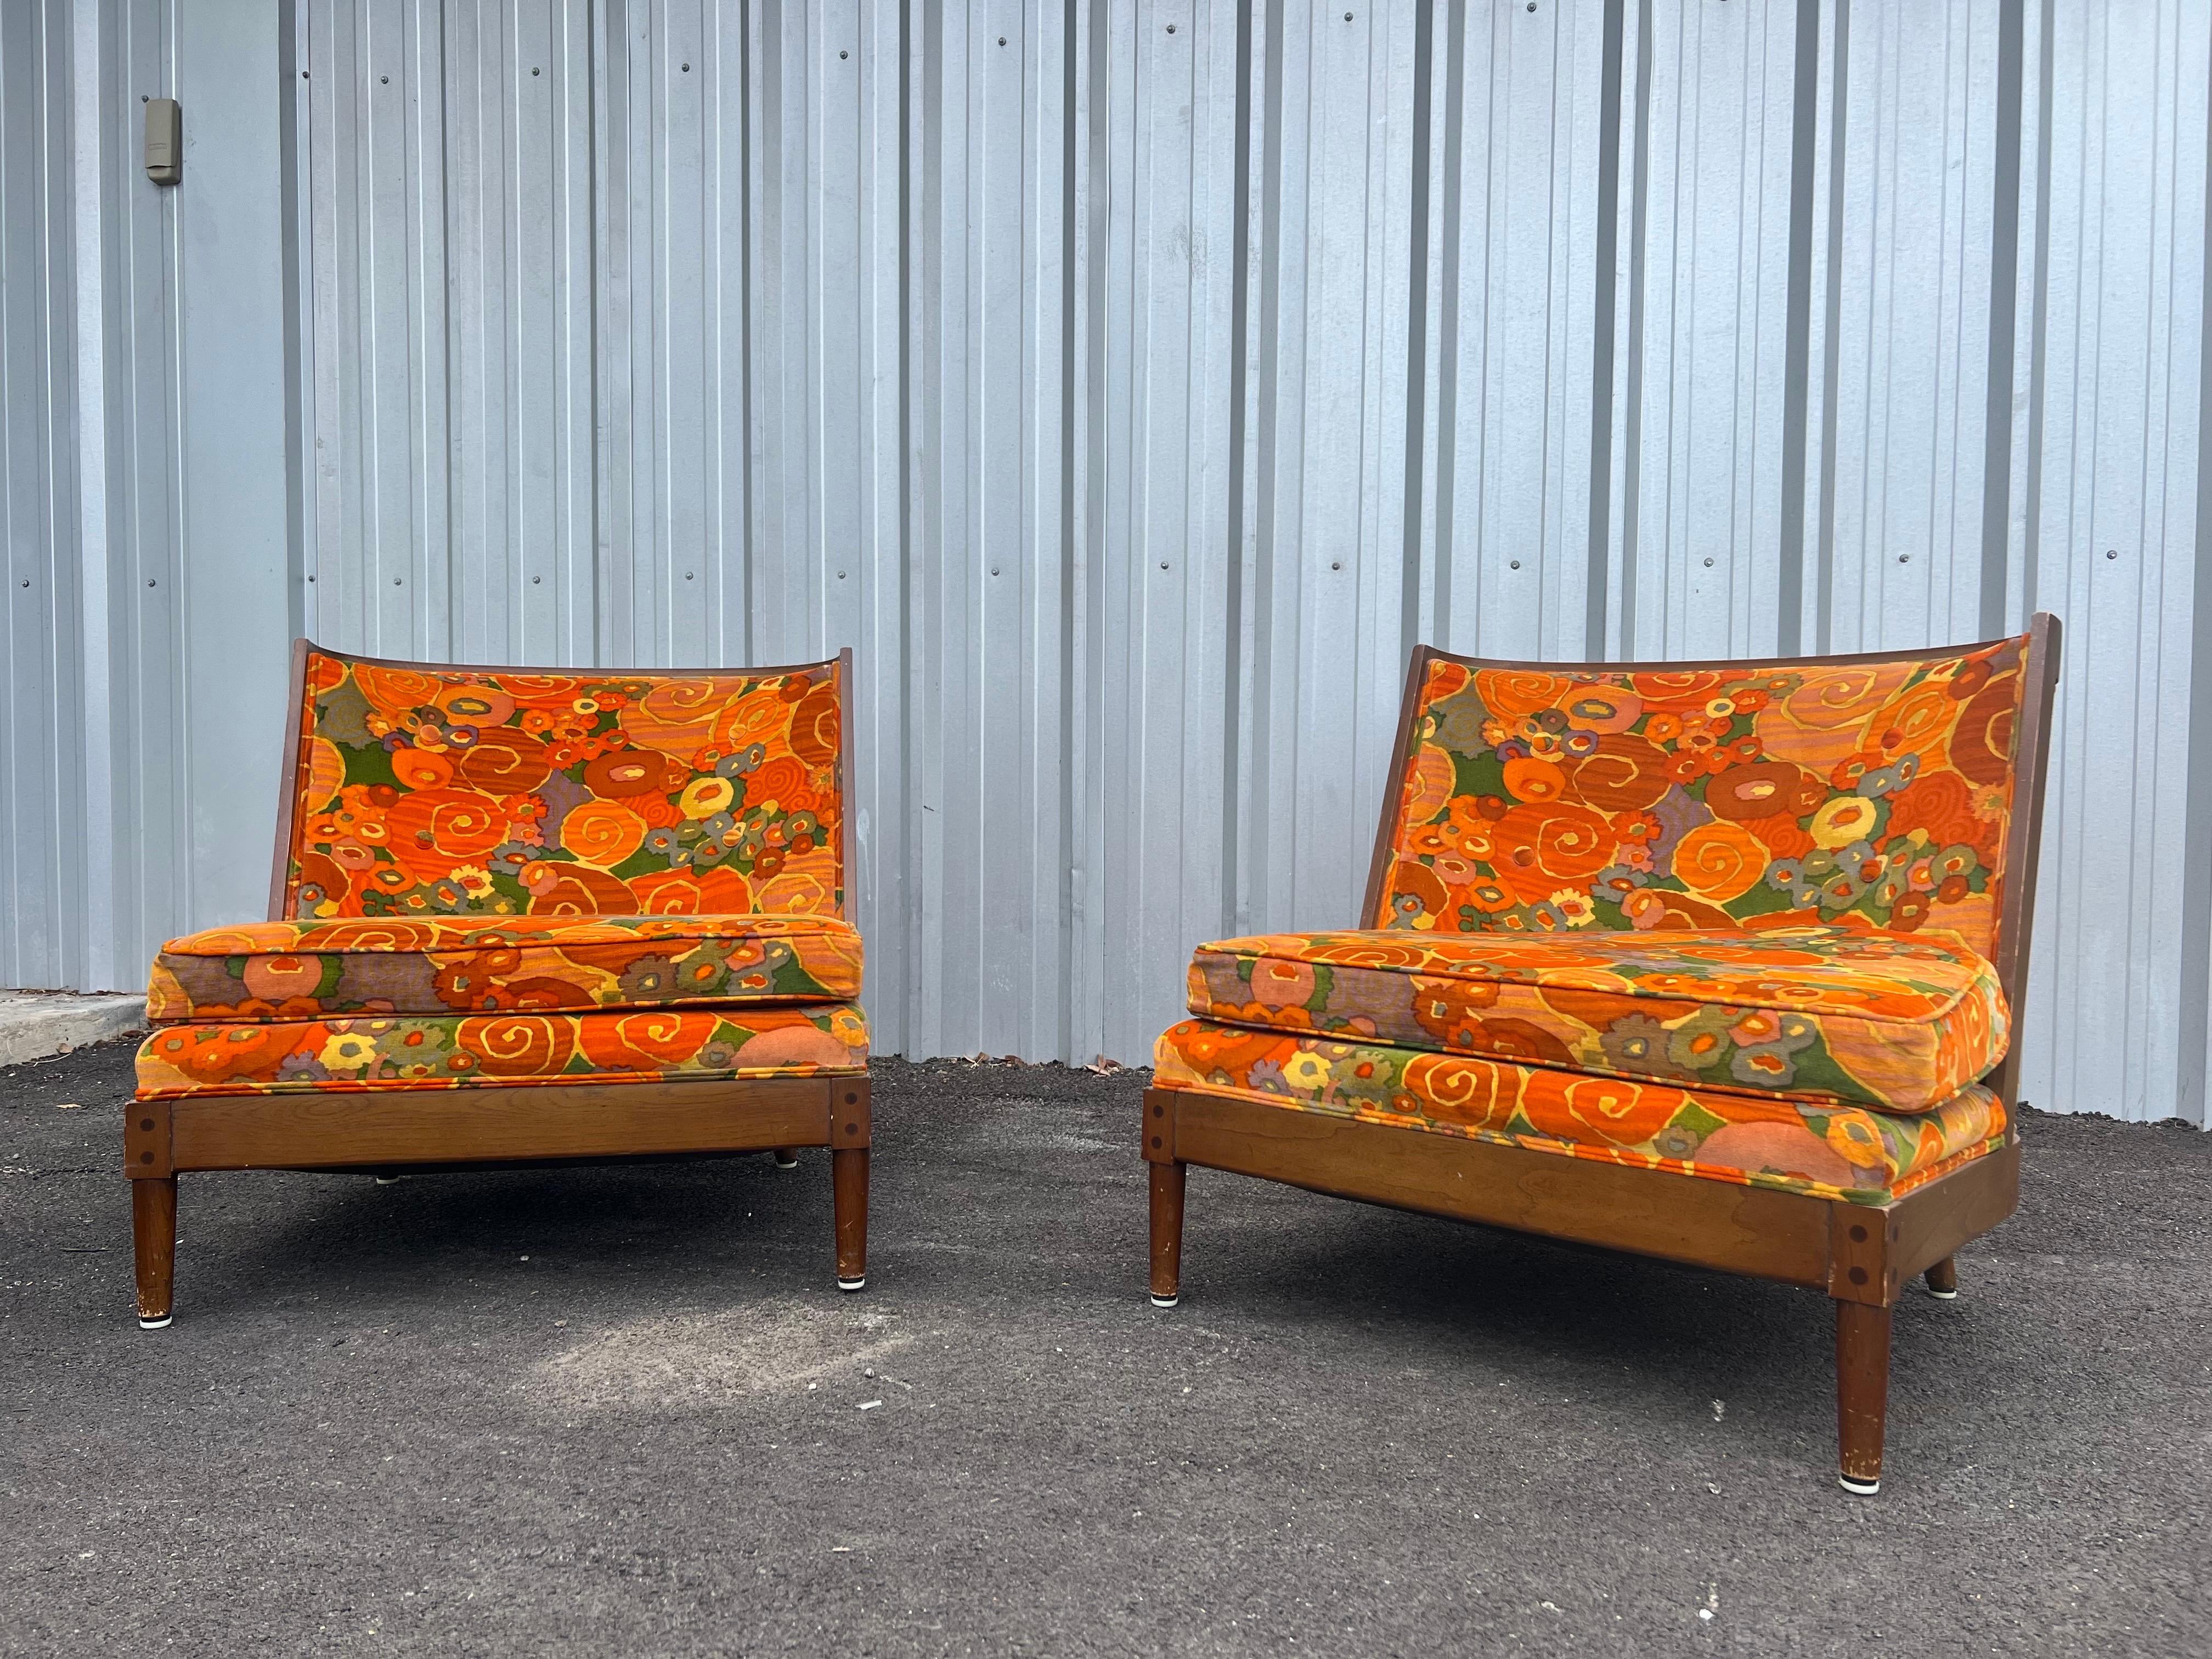 Pair of Mid-Century Modern slipper chairs made of fruitwood with original Jack Lenor Larsen fabric who is known for his bold use of colors and patterns. This pair of vintage lounge chairs are in good overall condition. There is some wear on the